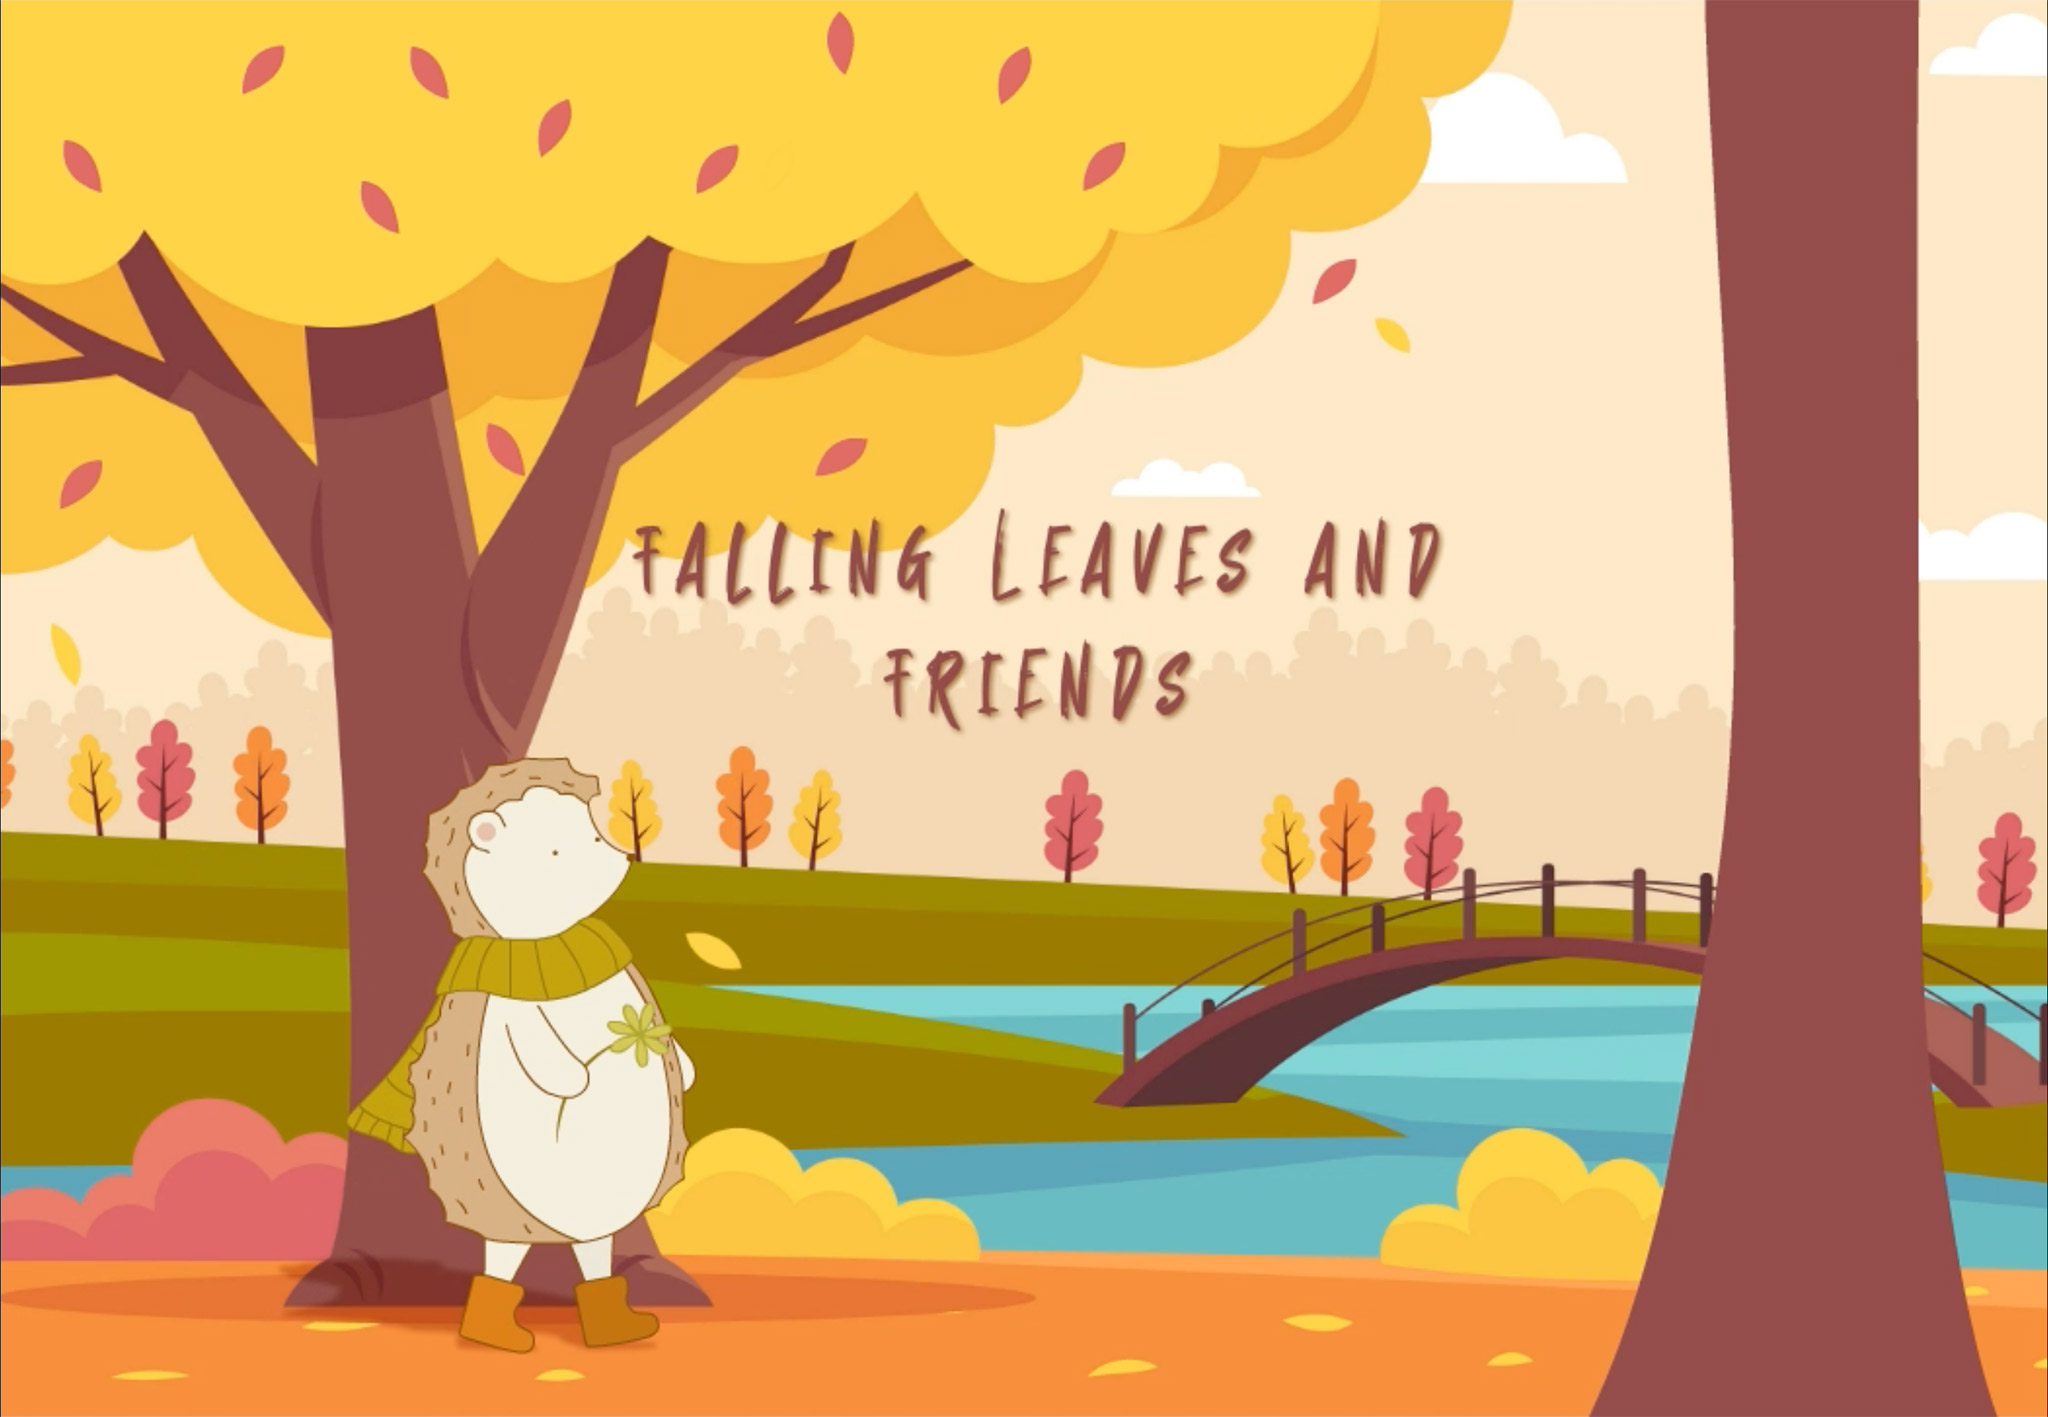 Thumbnail of my character animation called Falling Leaves and Friends. Image displays a hedgehog walking in a fall scene.